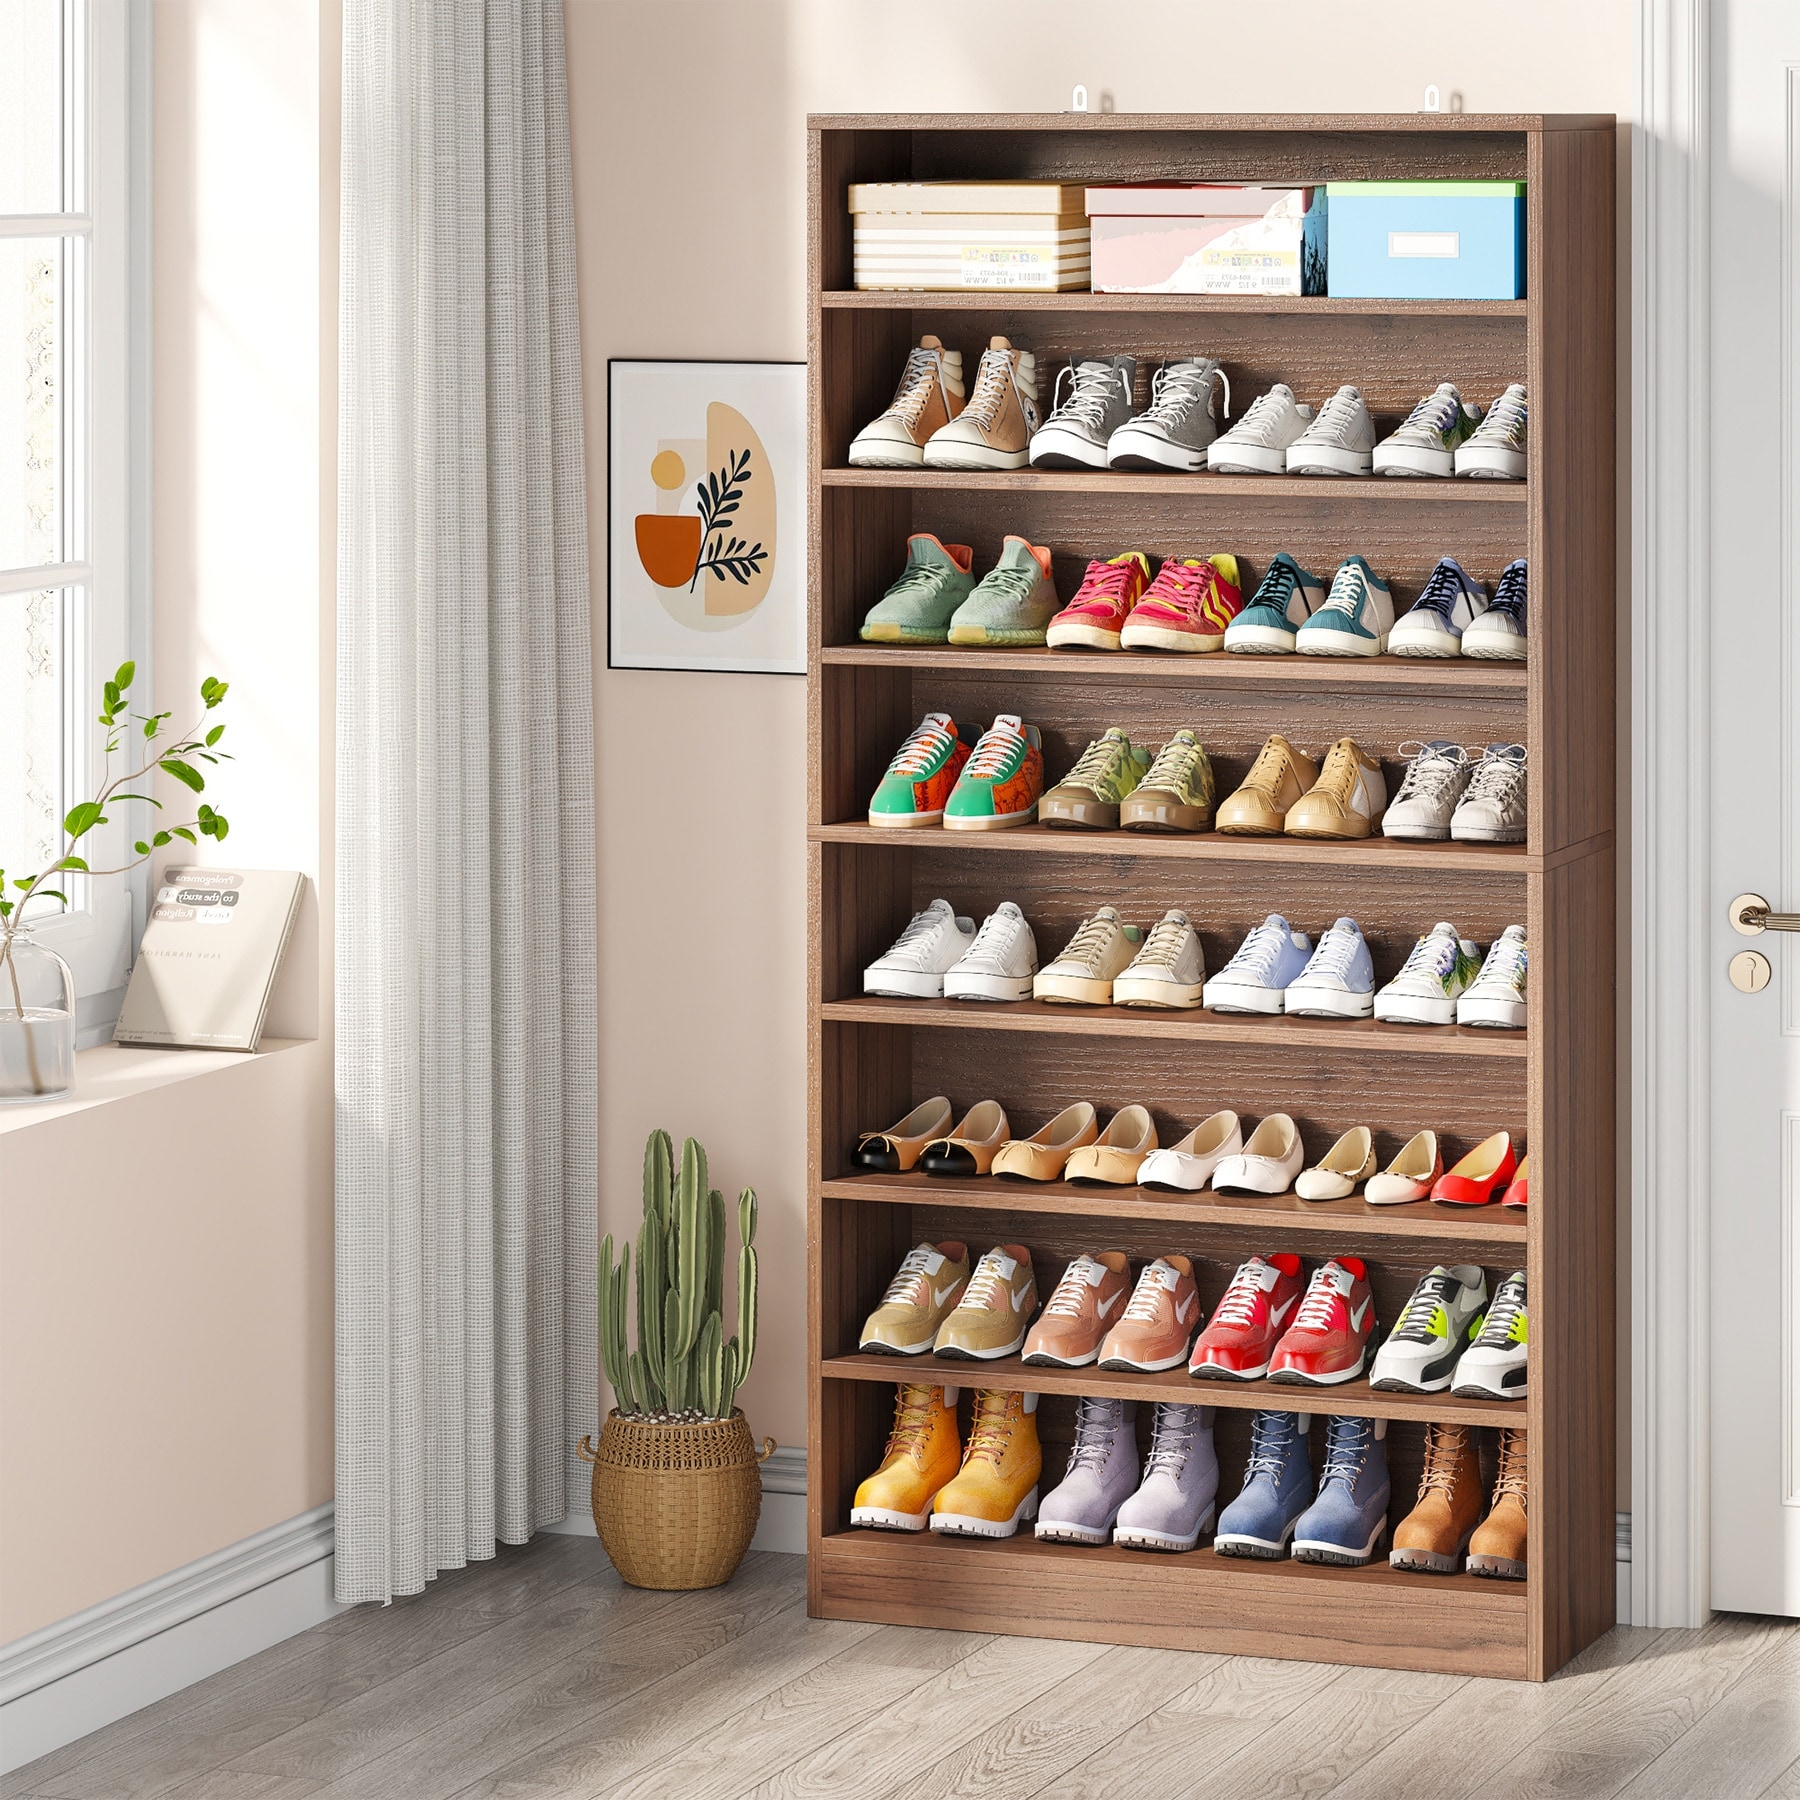 https://ak1.ostkcdn.com/images/products/is/images/direct/de74b56941ebd61f2026b7478b97db578f7183f4/Shoe-Cabinet%2C9-Tiers-Tall-Shoes-Storage-Rack-Cabinets%2CWood-Shoe-Stand-with-Open-Shelf-for-Entryway.jpg